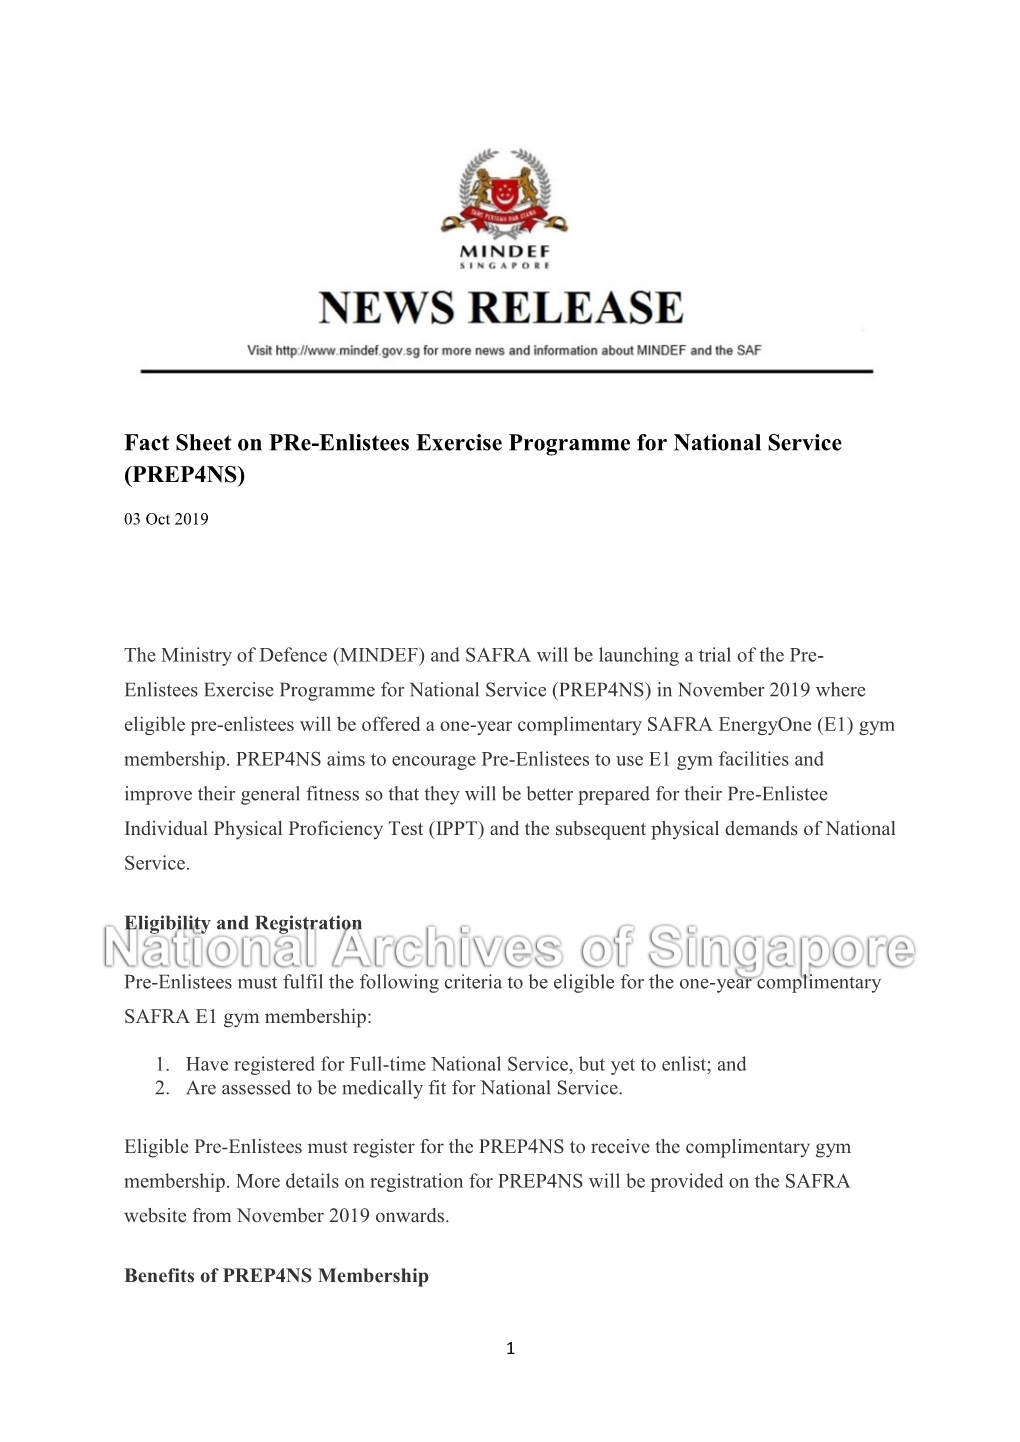 Fact Sheet on Pre-Enlistees Exercise Programme for National Service (PREP4NS)